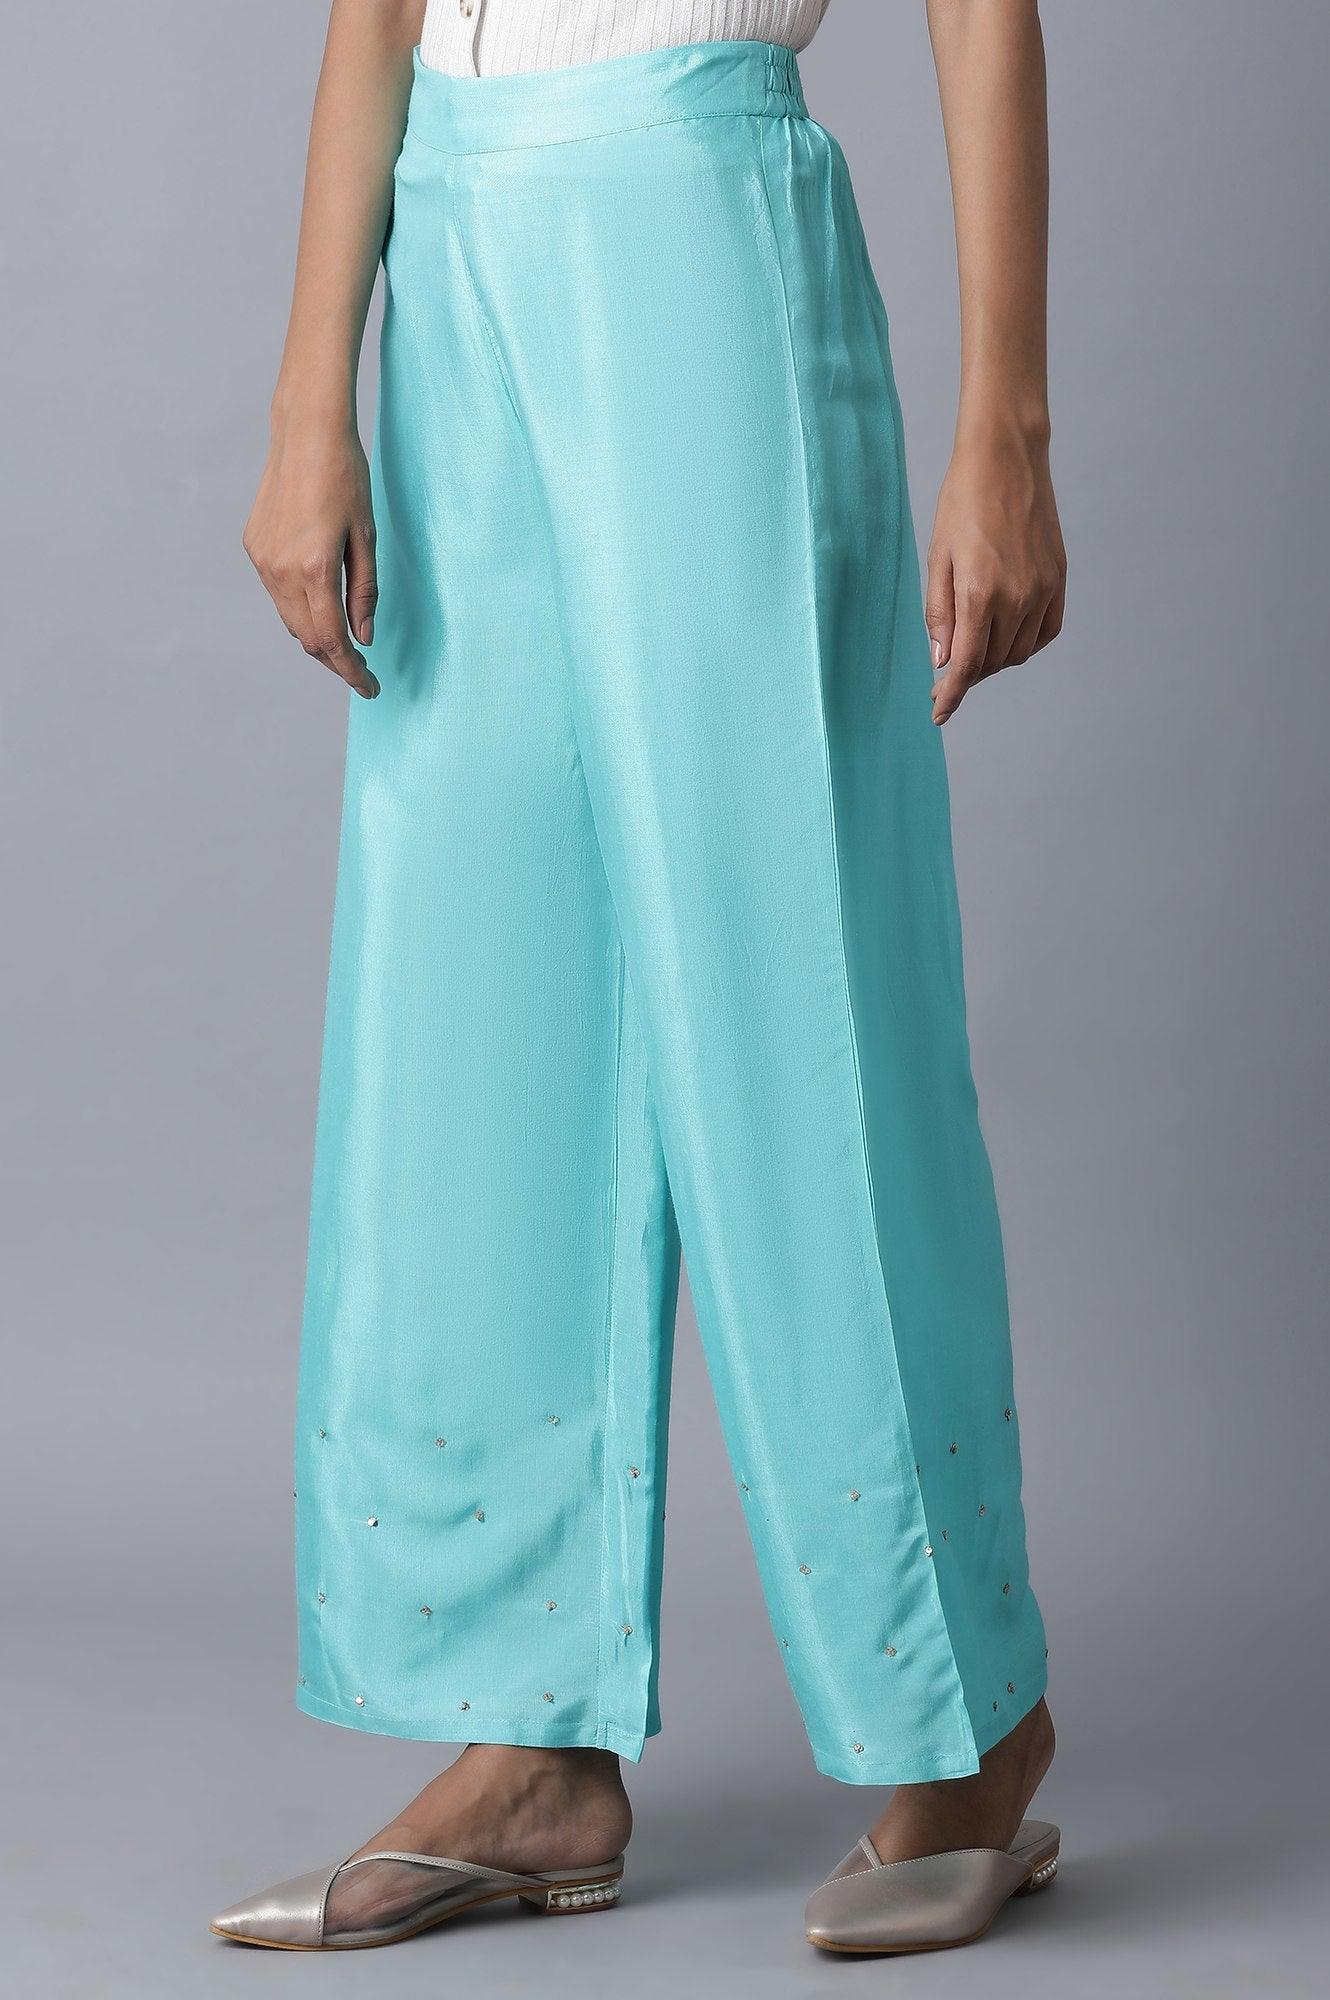 Turquoise Parallel Pants - wforwoman